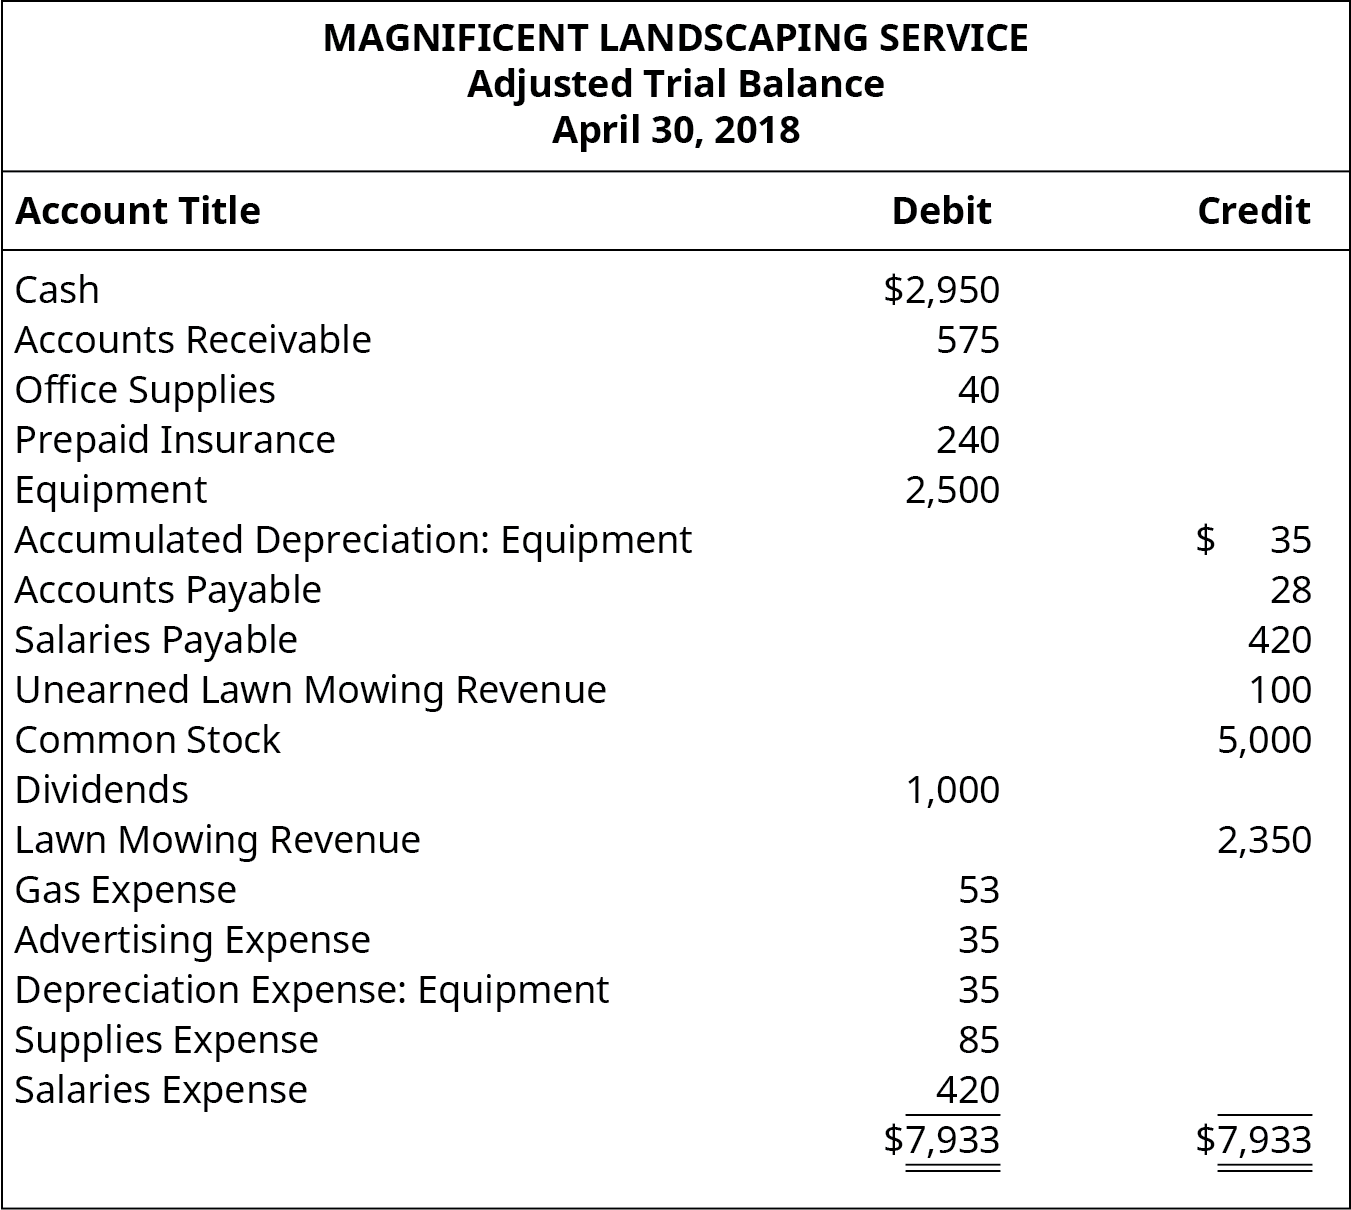 Magnificent Landscaping Service, Adjusted Trial Balance, April 30, 2018. Debit accounts: Cash $2,950; Accounts Receivable 575; Office Supplies 40; Prepaid Insurance 240; Equipment 2,500; Dividends 1,000; Gas Expense 53; Advertising Expense 35; Depreciation Expense: Equipment 35; Supplies Expense 85; Salaries Expense 420, Total Debits $7,933. Credit accounts: Accumulated Depreciation: Equipment 35; Accounts Payable 28; Salaries Payable 420; Unearned Lawn Mowing Revenue 100; Common Stock 5,000; Lawn Mowing Revenue 2,350; Total Credits $7,933.